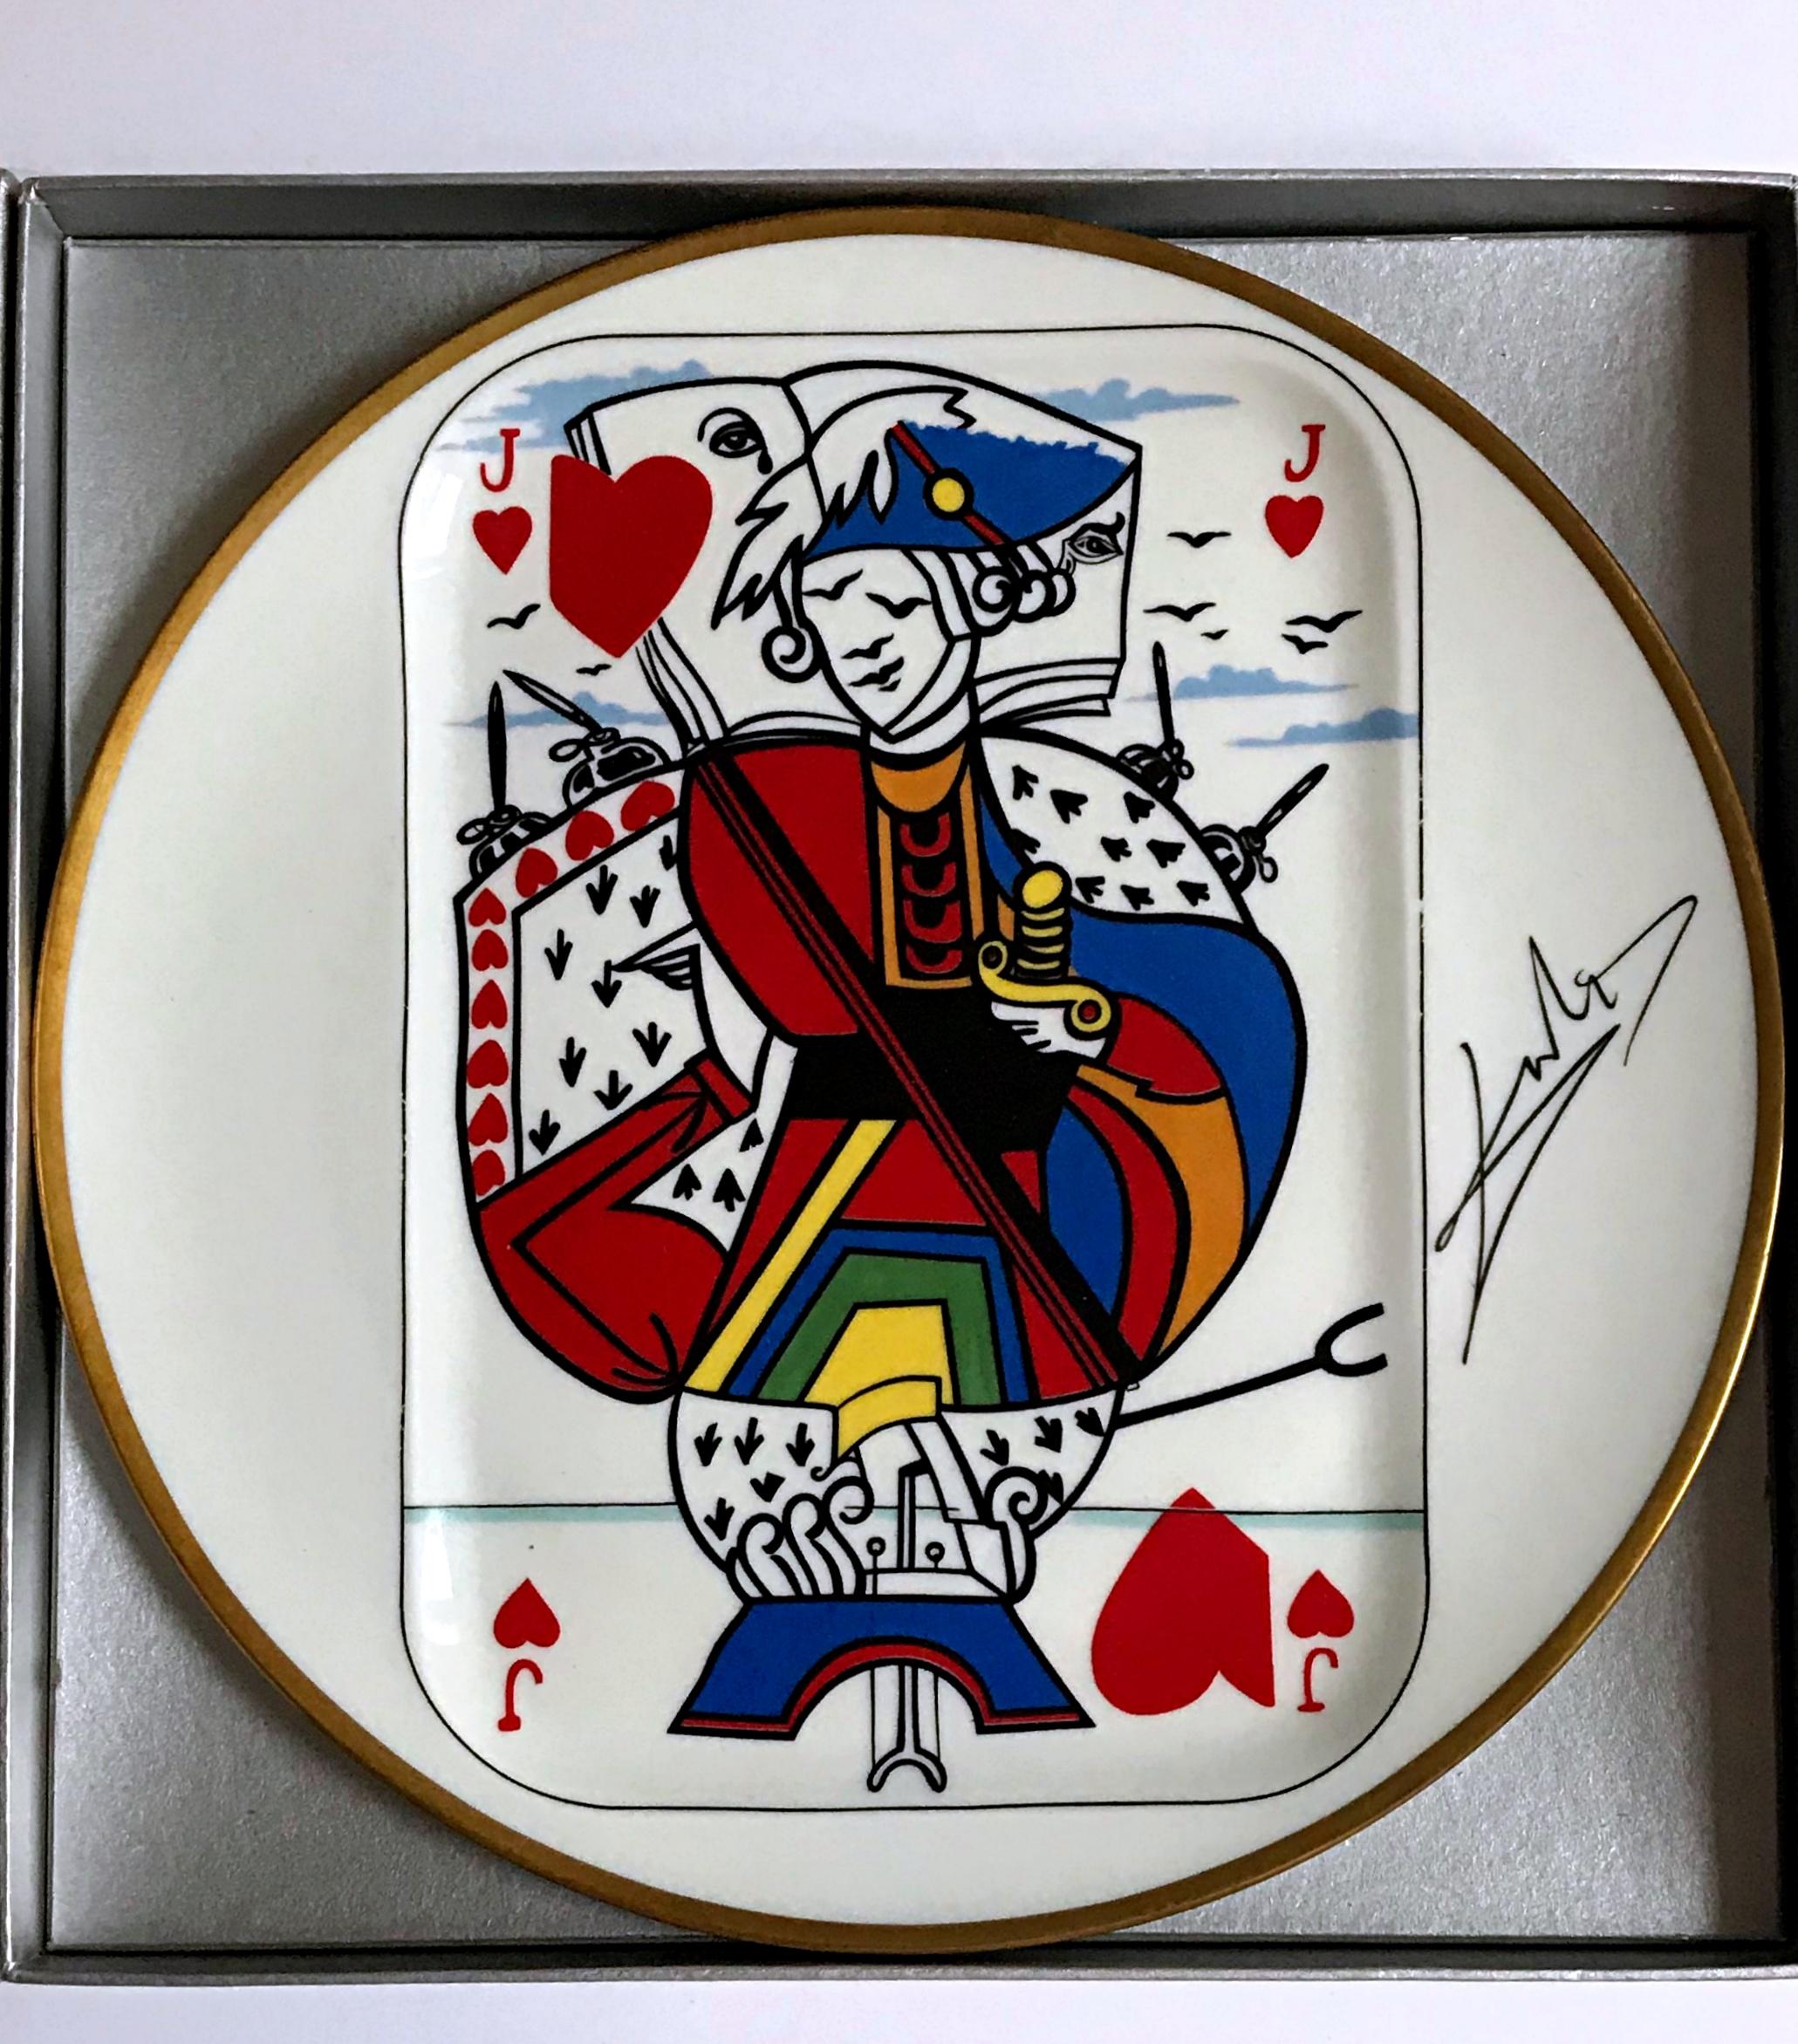 Jack of Hearts - limited edition porcelain plate made in France  - Surrealist Mixed Media Art by Salvador Dalí